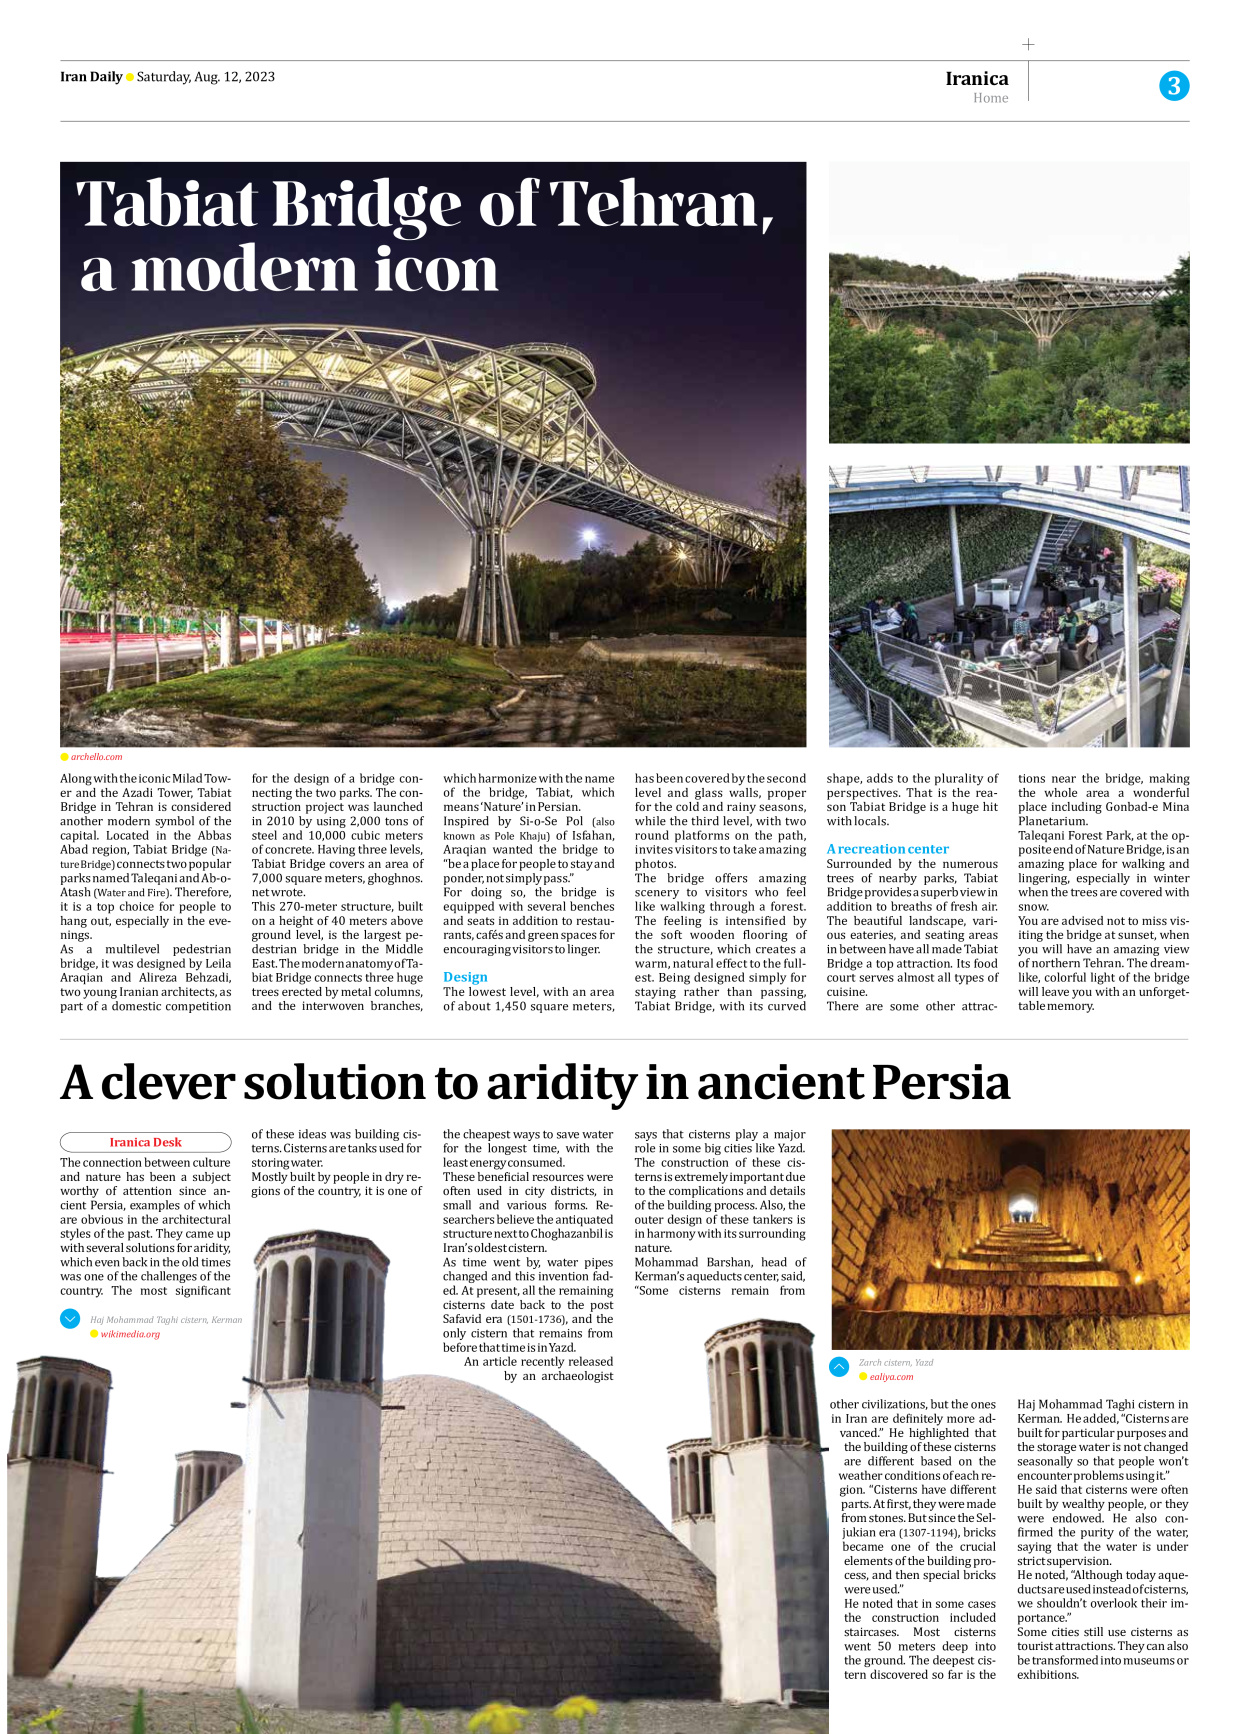 Iran Daily - Number Seven Thousand Three Hundred and Sixty - 12 August 2023 - Page 3